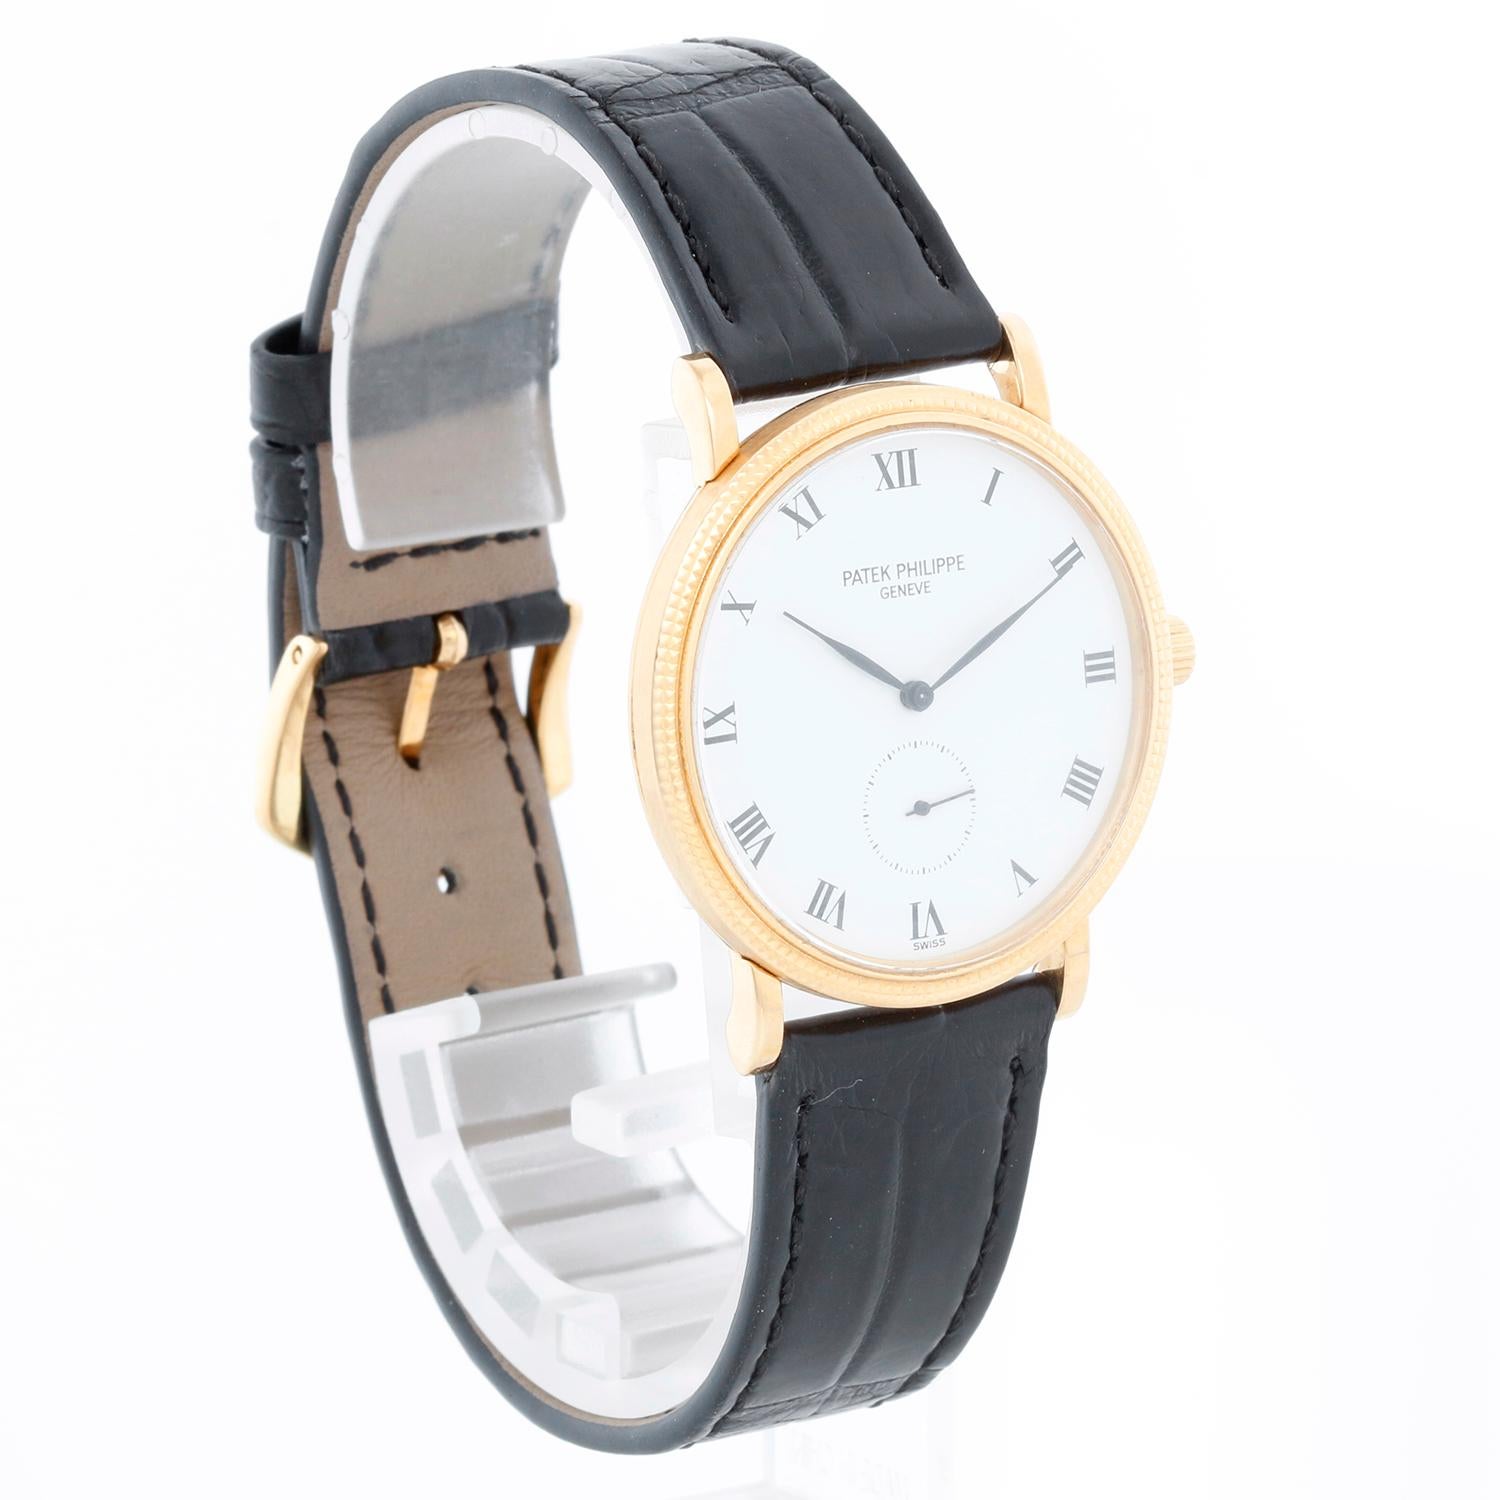 Patek Philippe Calatrava 18k Rose Gold Men's Manual Winding Watch  3919 R (or 39 In Excellent Condition For Sale In Dallas, TX